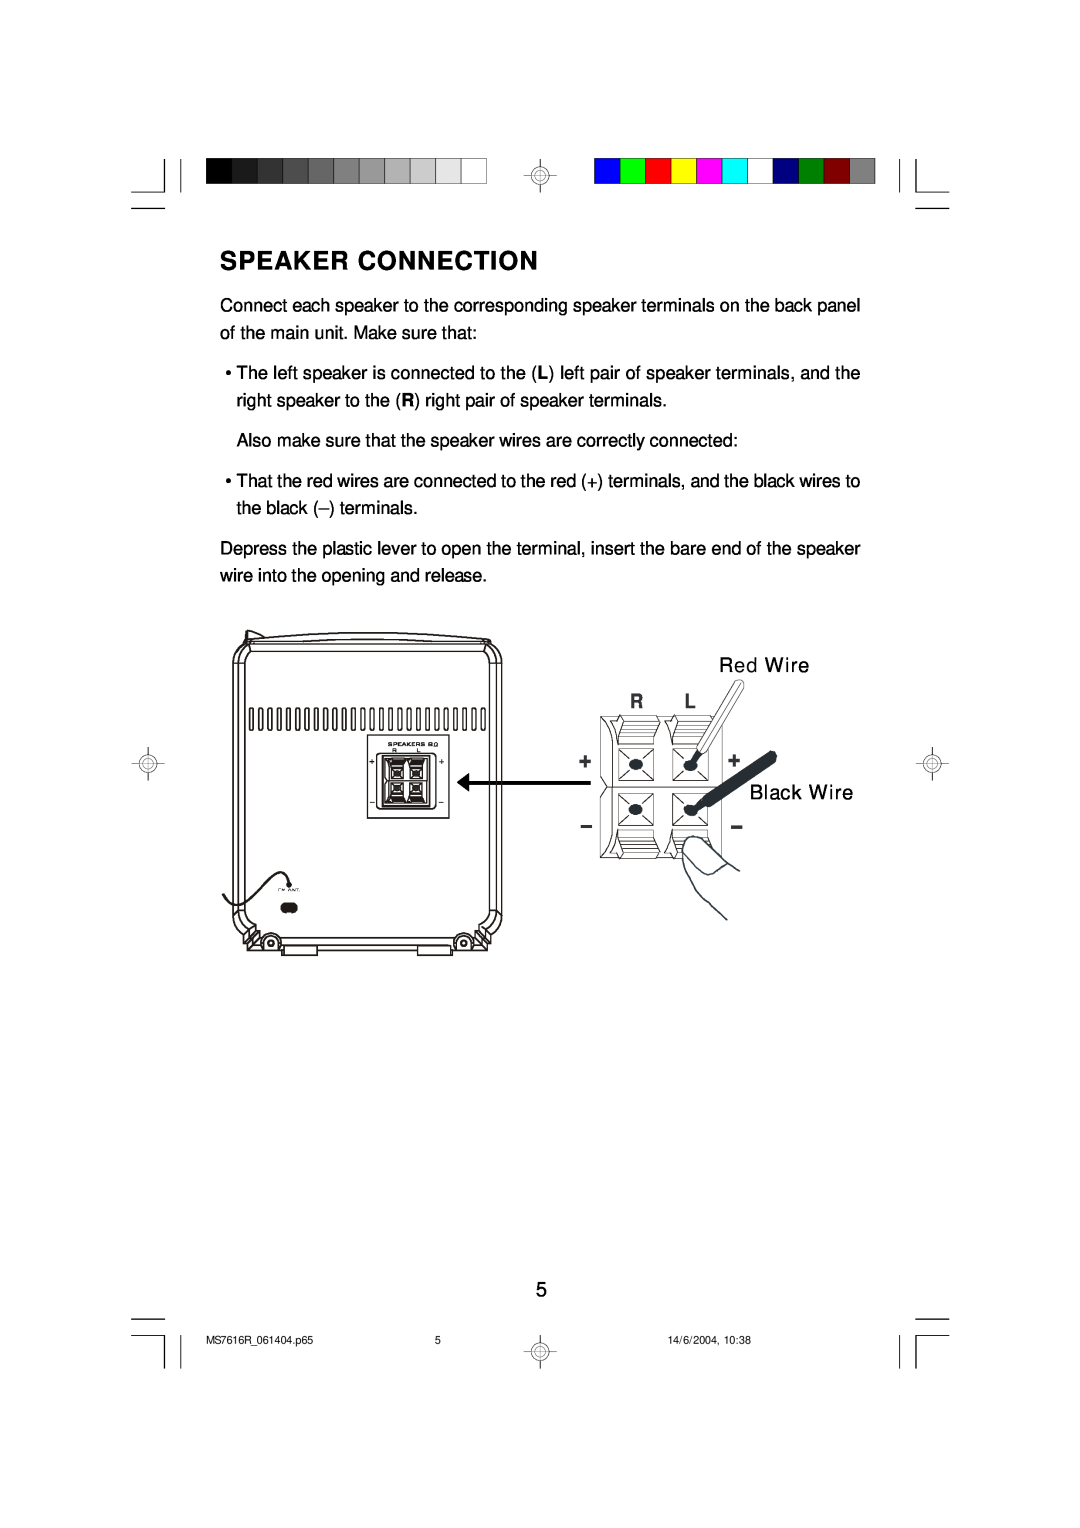 Emerson MS7616R owner manual Speaker Connection 